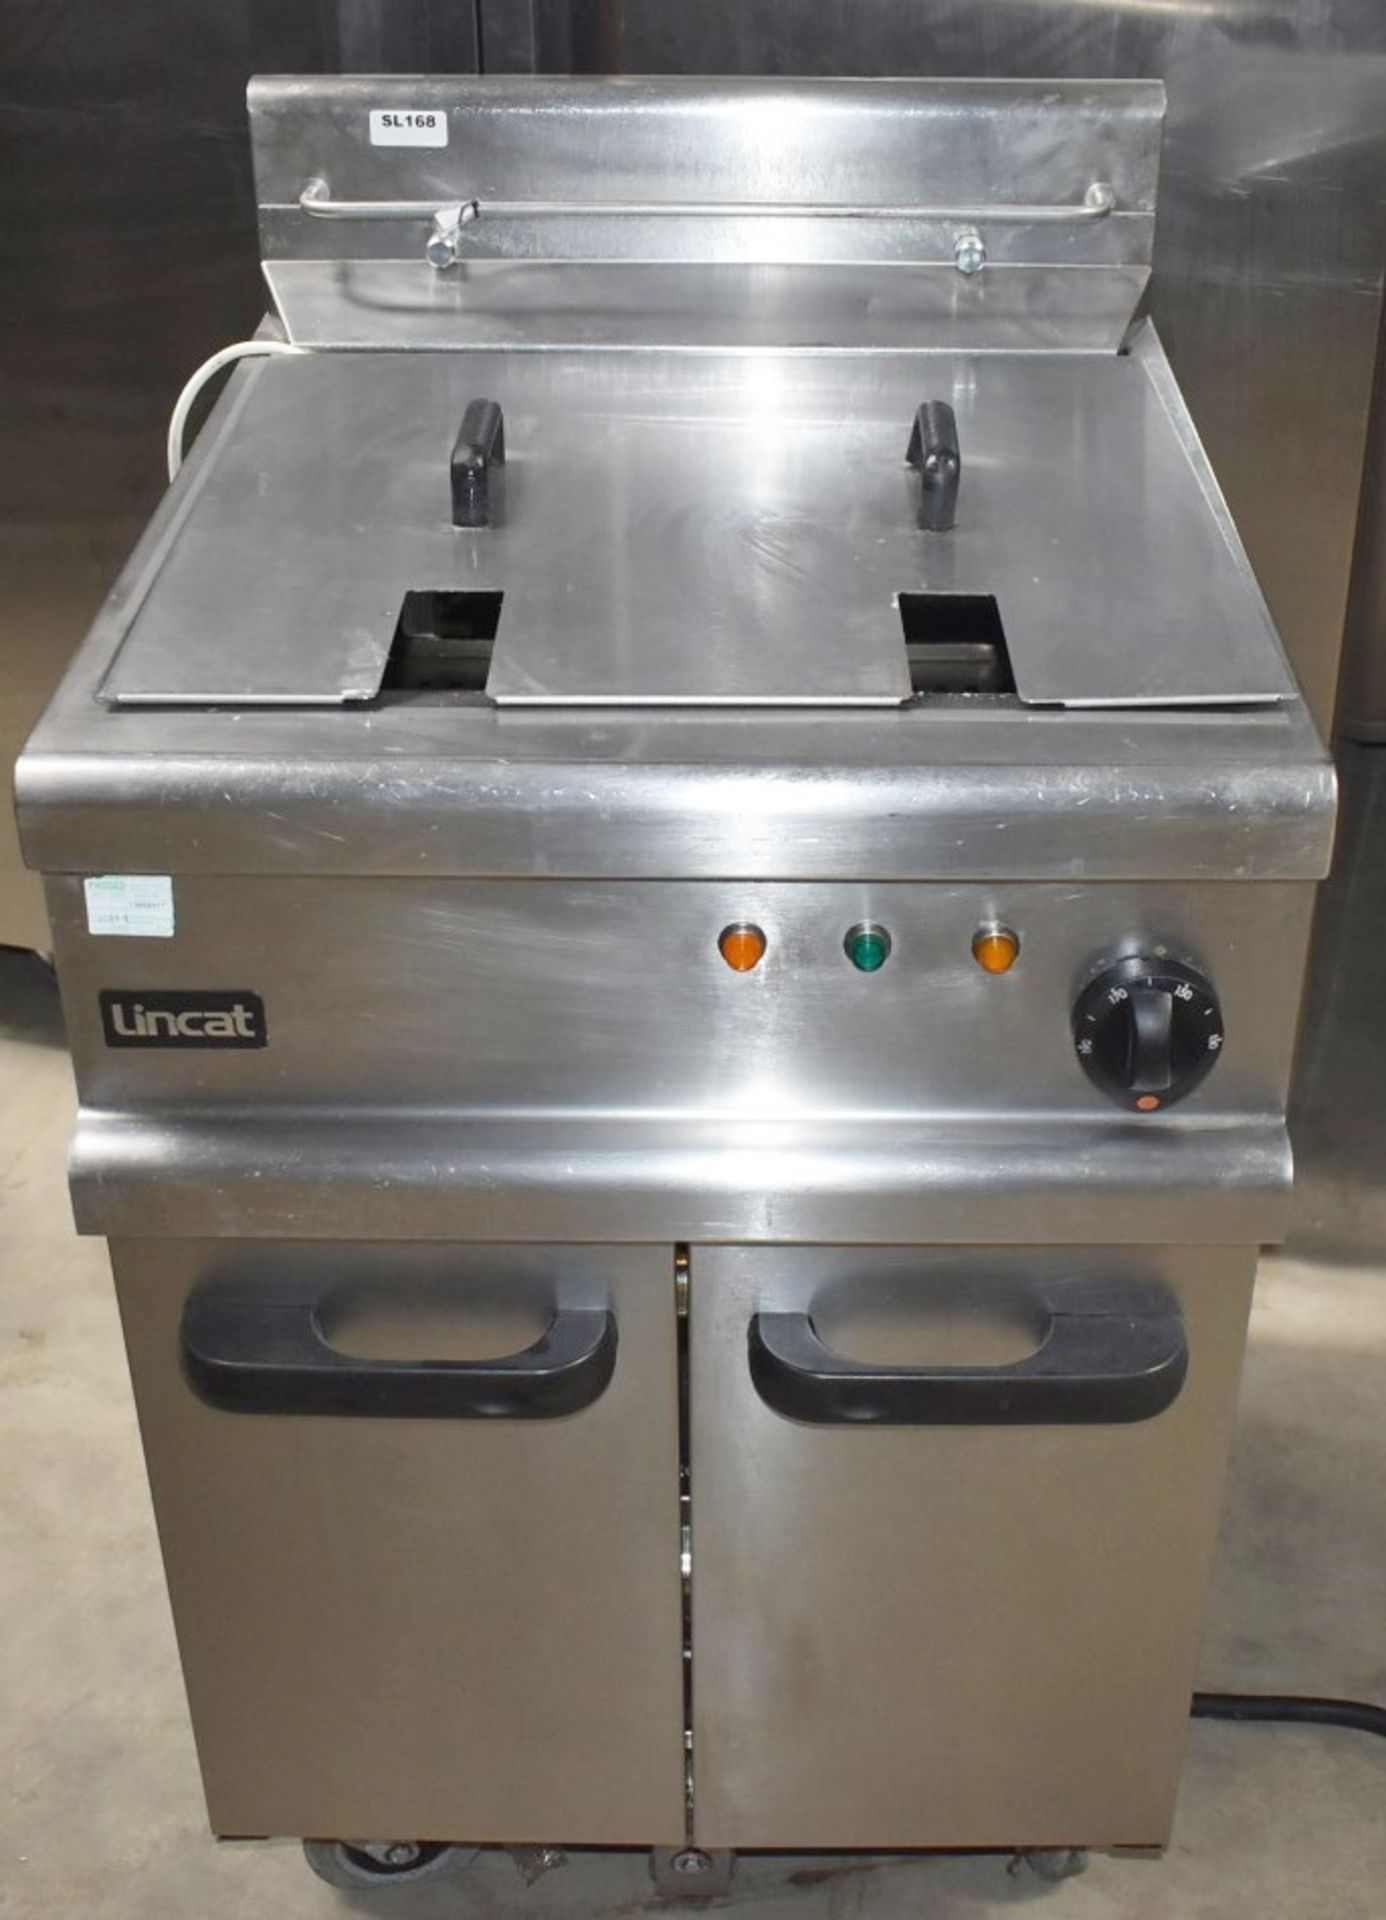 1 x Lincat Opus 700 Single Tank Electric Fryer With Built In Filtration - 3 Phase - Image 13 of 19